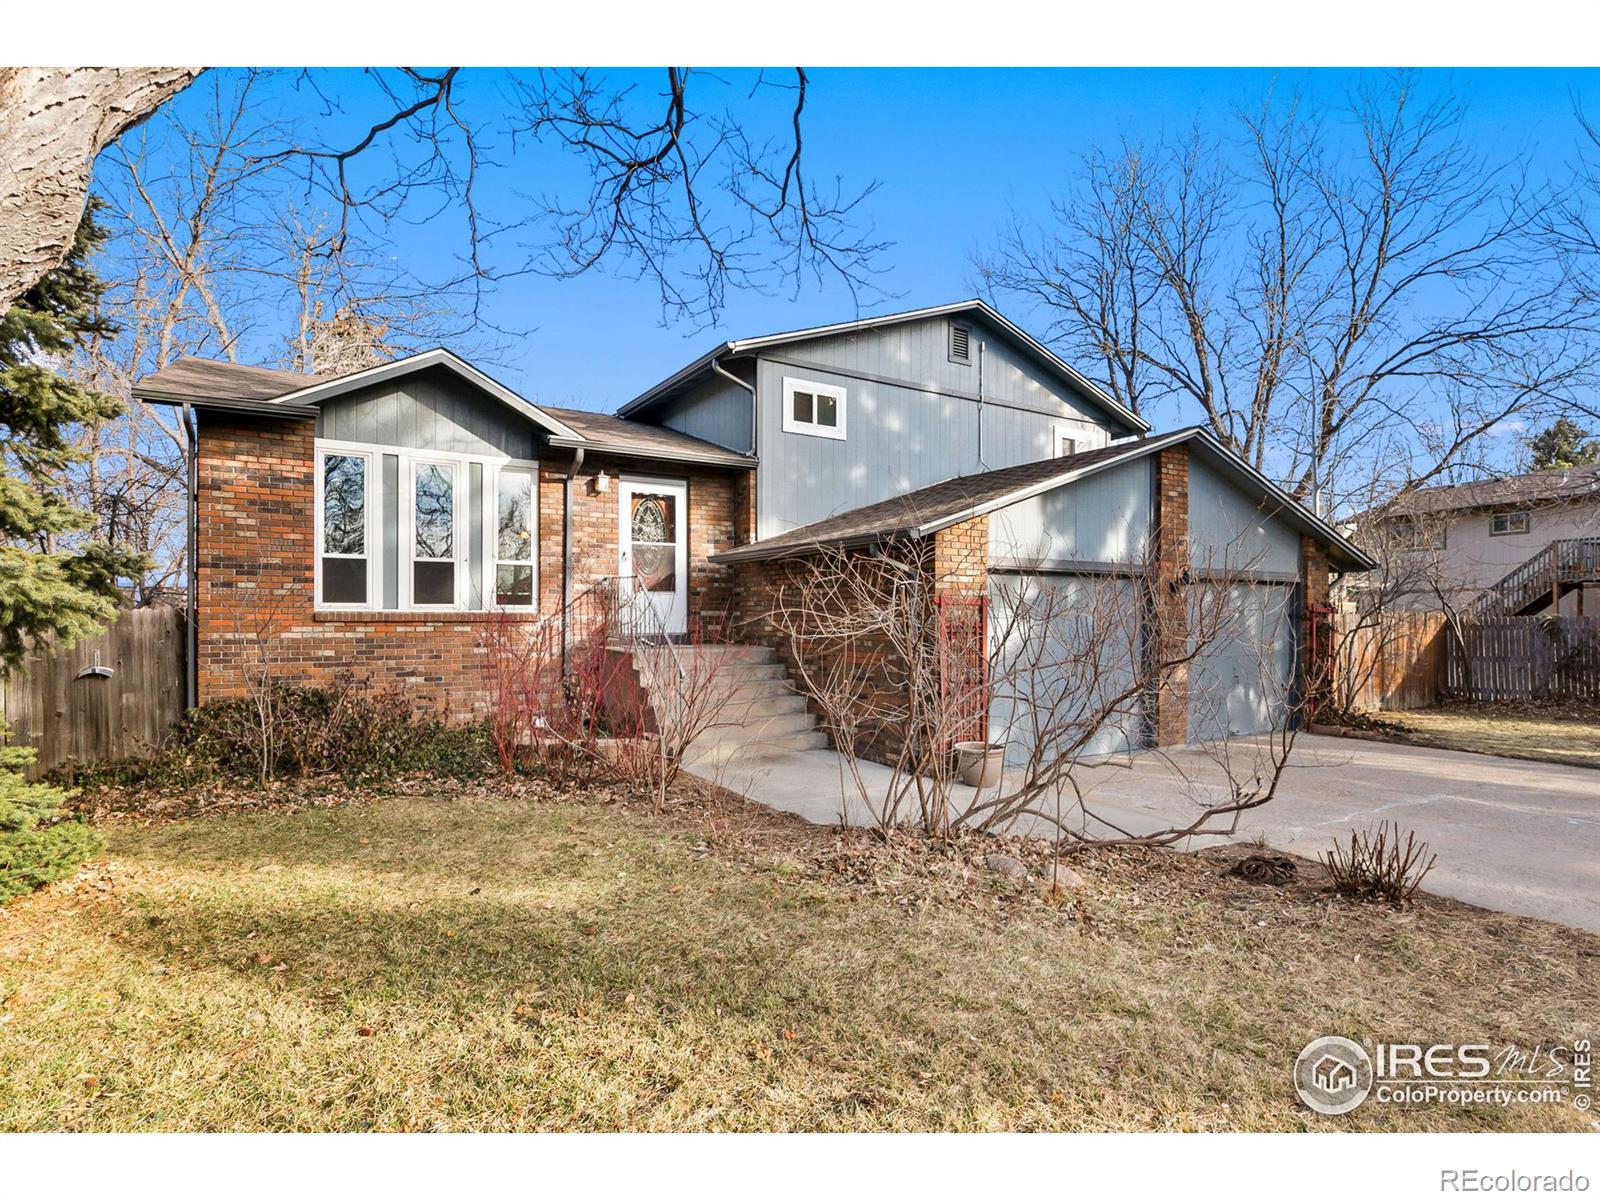 Report Image for 2606  Hanover Drive,Fort Collins, Colorado